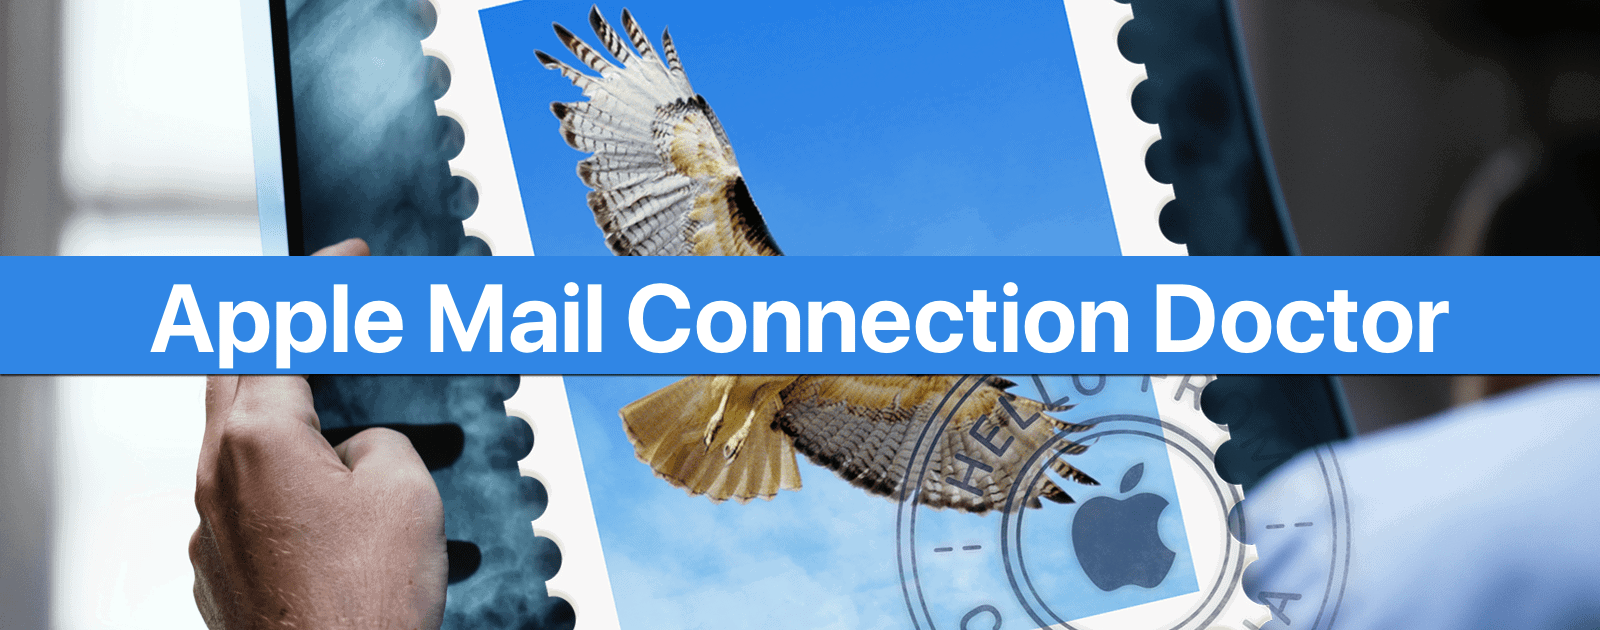 macOS: How to Use Apple Mail Connection Doctor